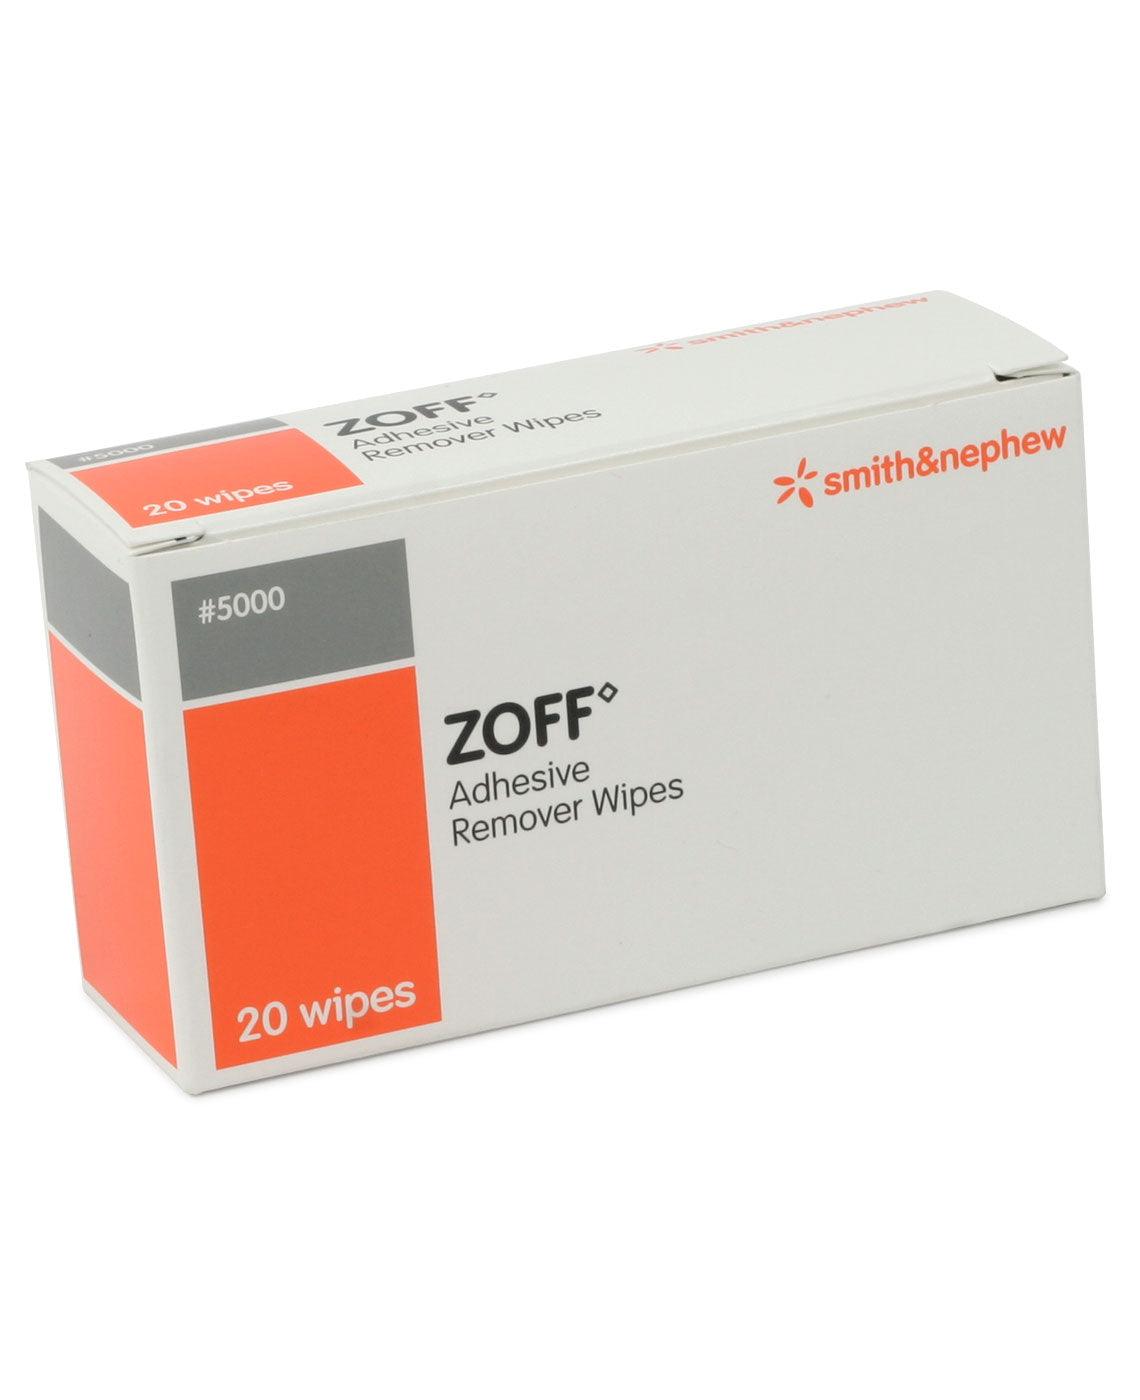 Zoff Adhesive Remover Wipes Pack of 20 - welzo